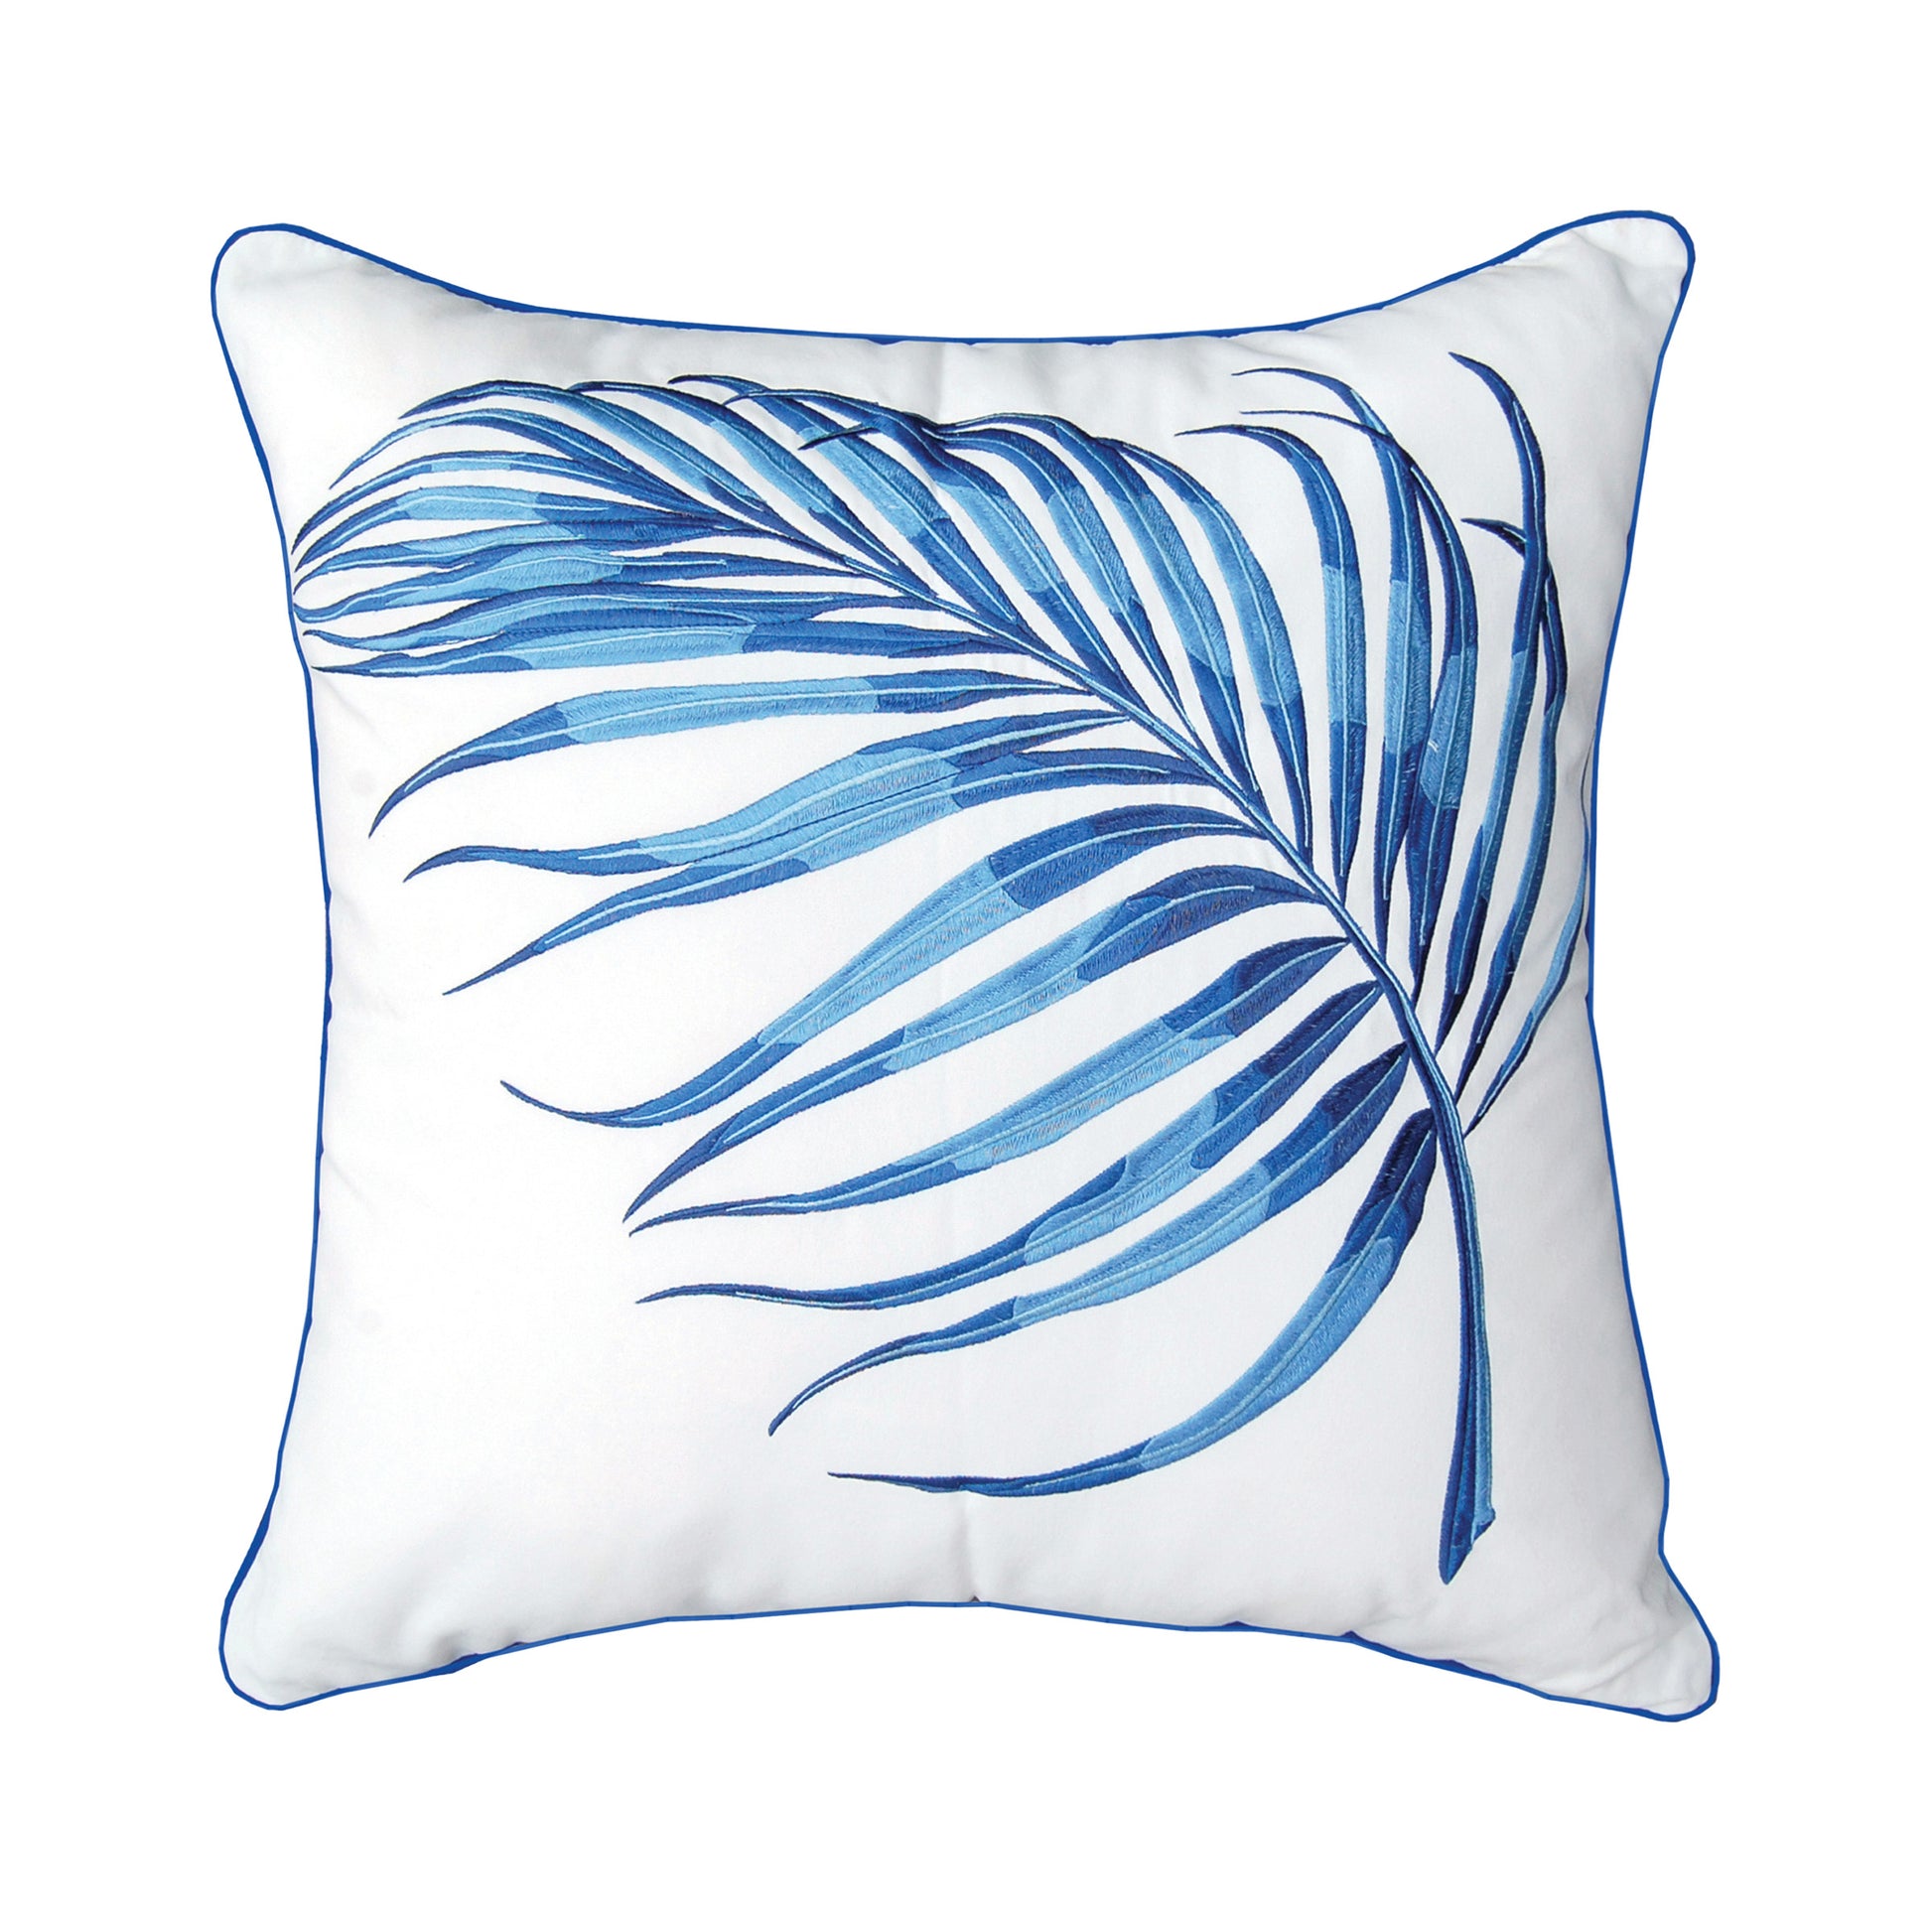 A large blue parlor palm embroidered on a white ground outdoor pillow with blue piped edging.